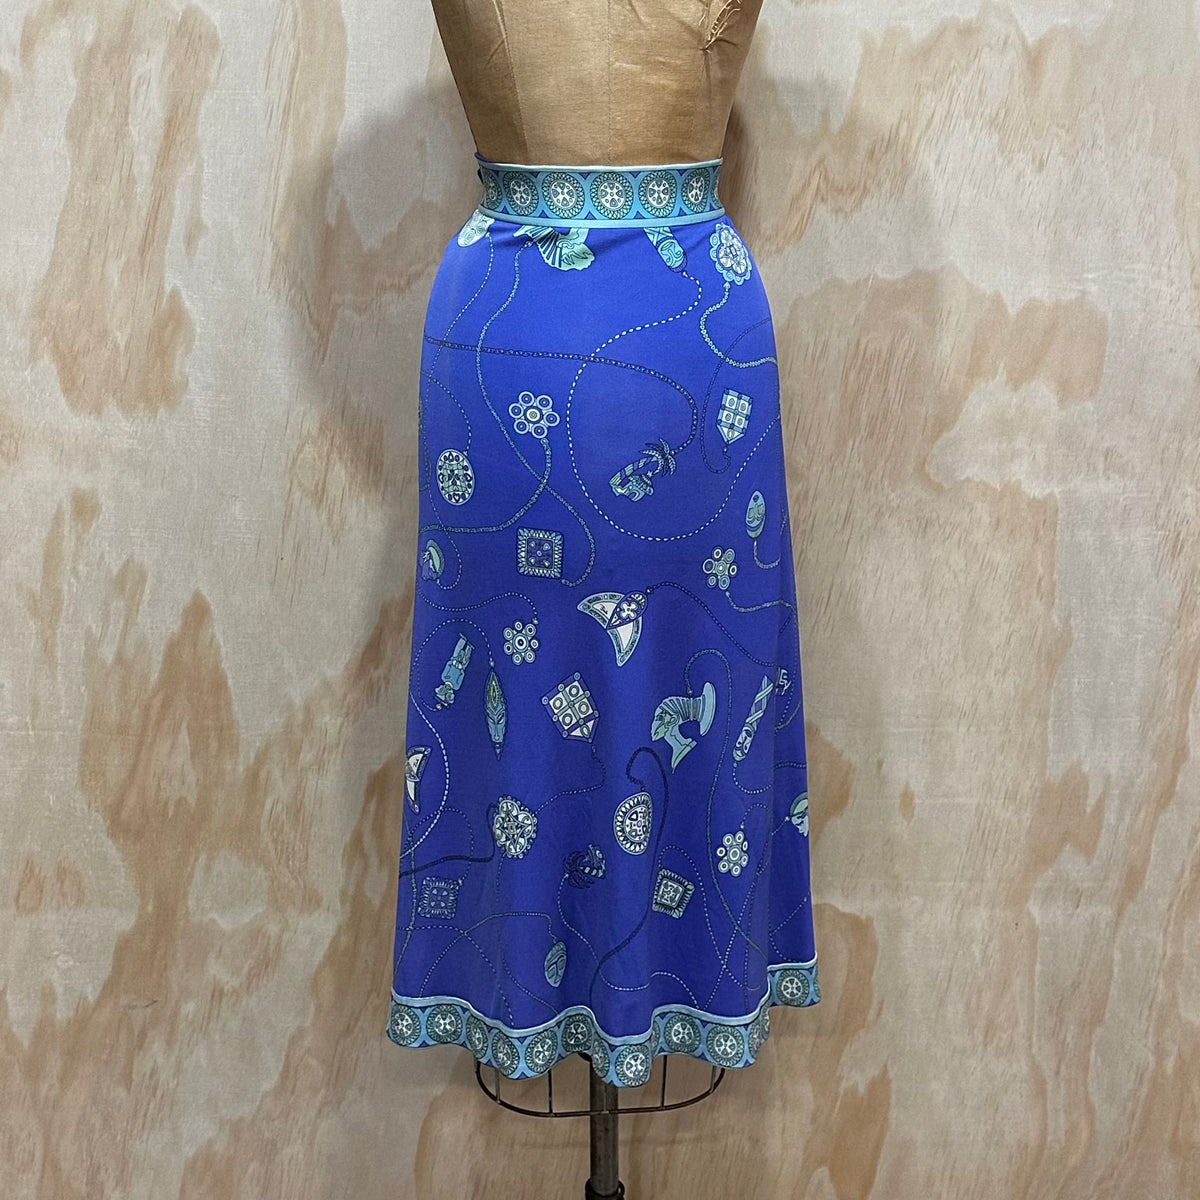 Vintage 70s Emilio Pucci Silk Skirt • Made in Italy • Saks Fifth Avenue • Size 14